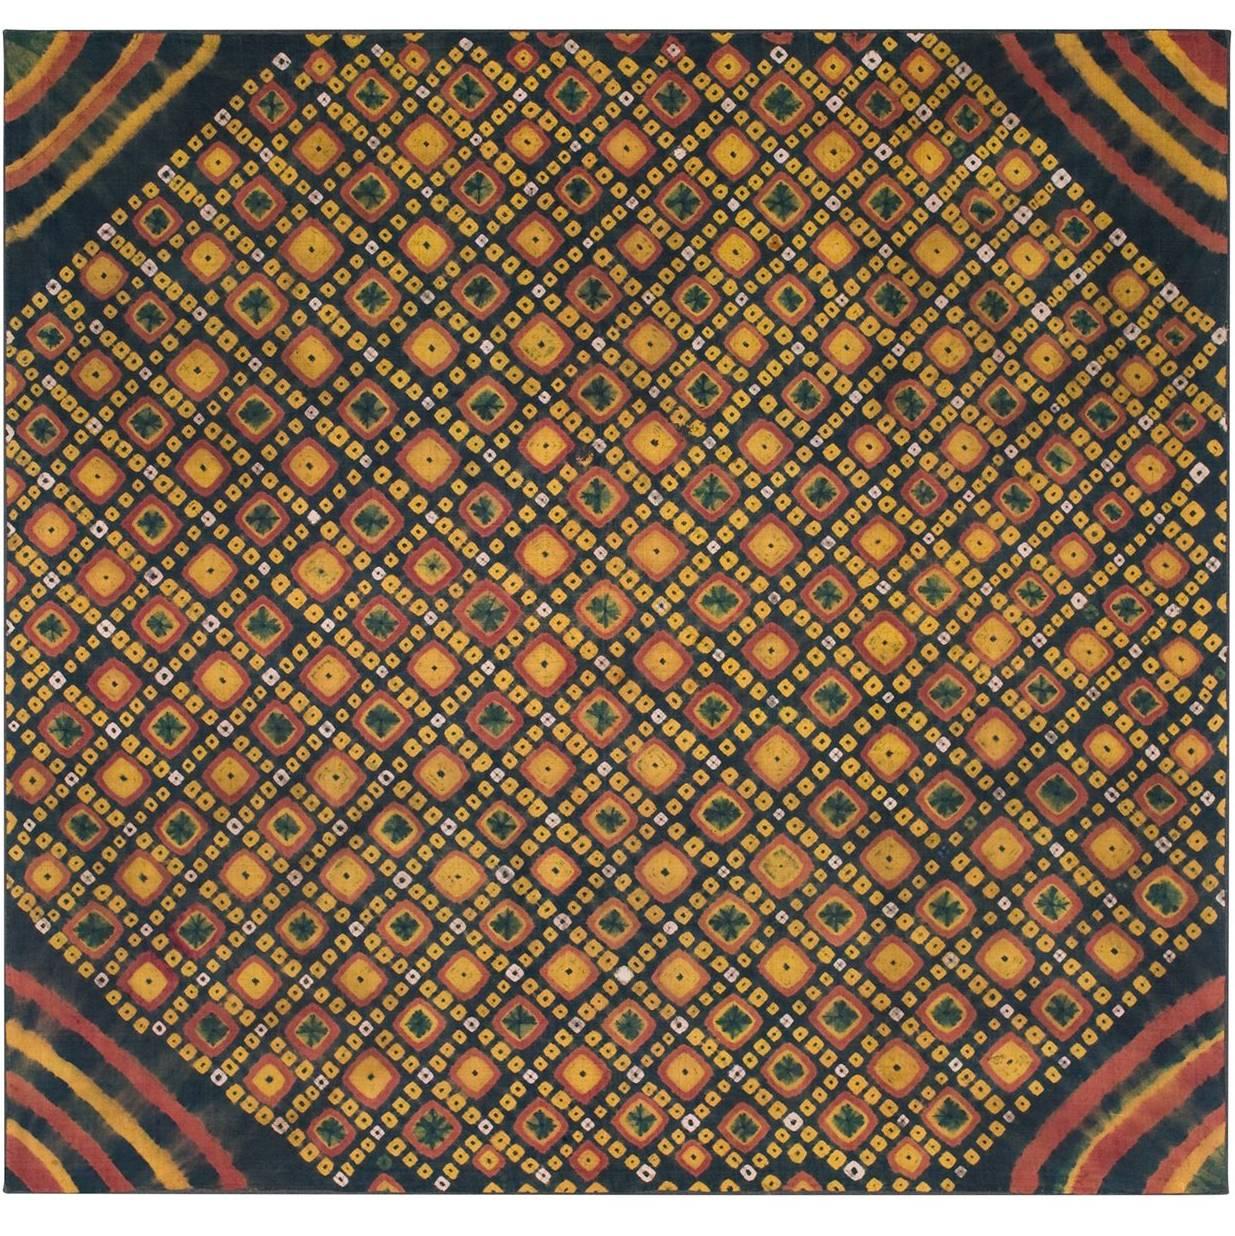 Woman’s Ceremonial Resist-Dyed Headscarf, Cambodia, circa 1900